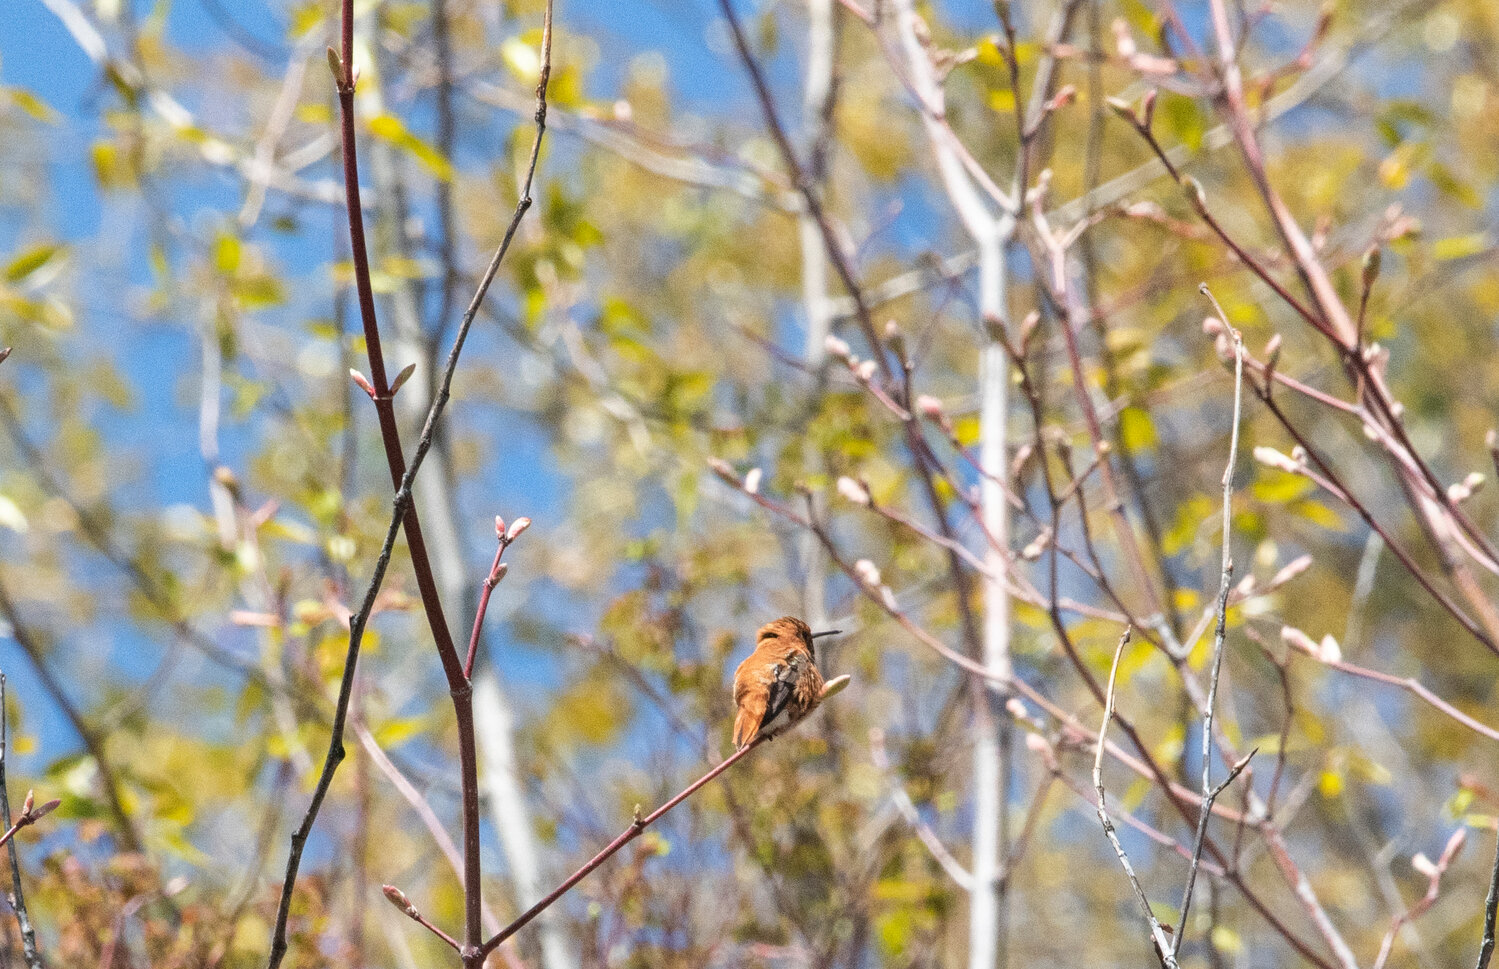 A Rufous hummingbird rests on a branch near Coldwater Lake by Mount St. Helens on Thursday, May 11.